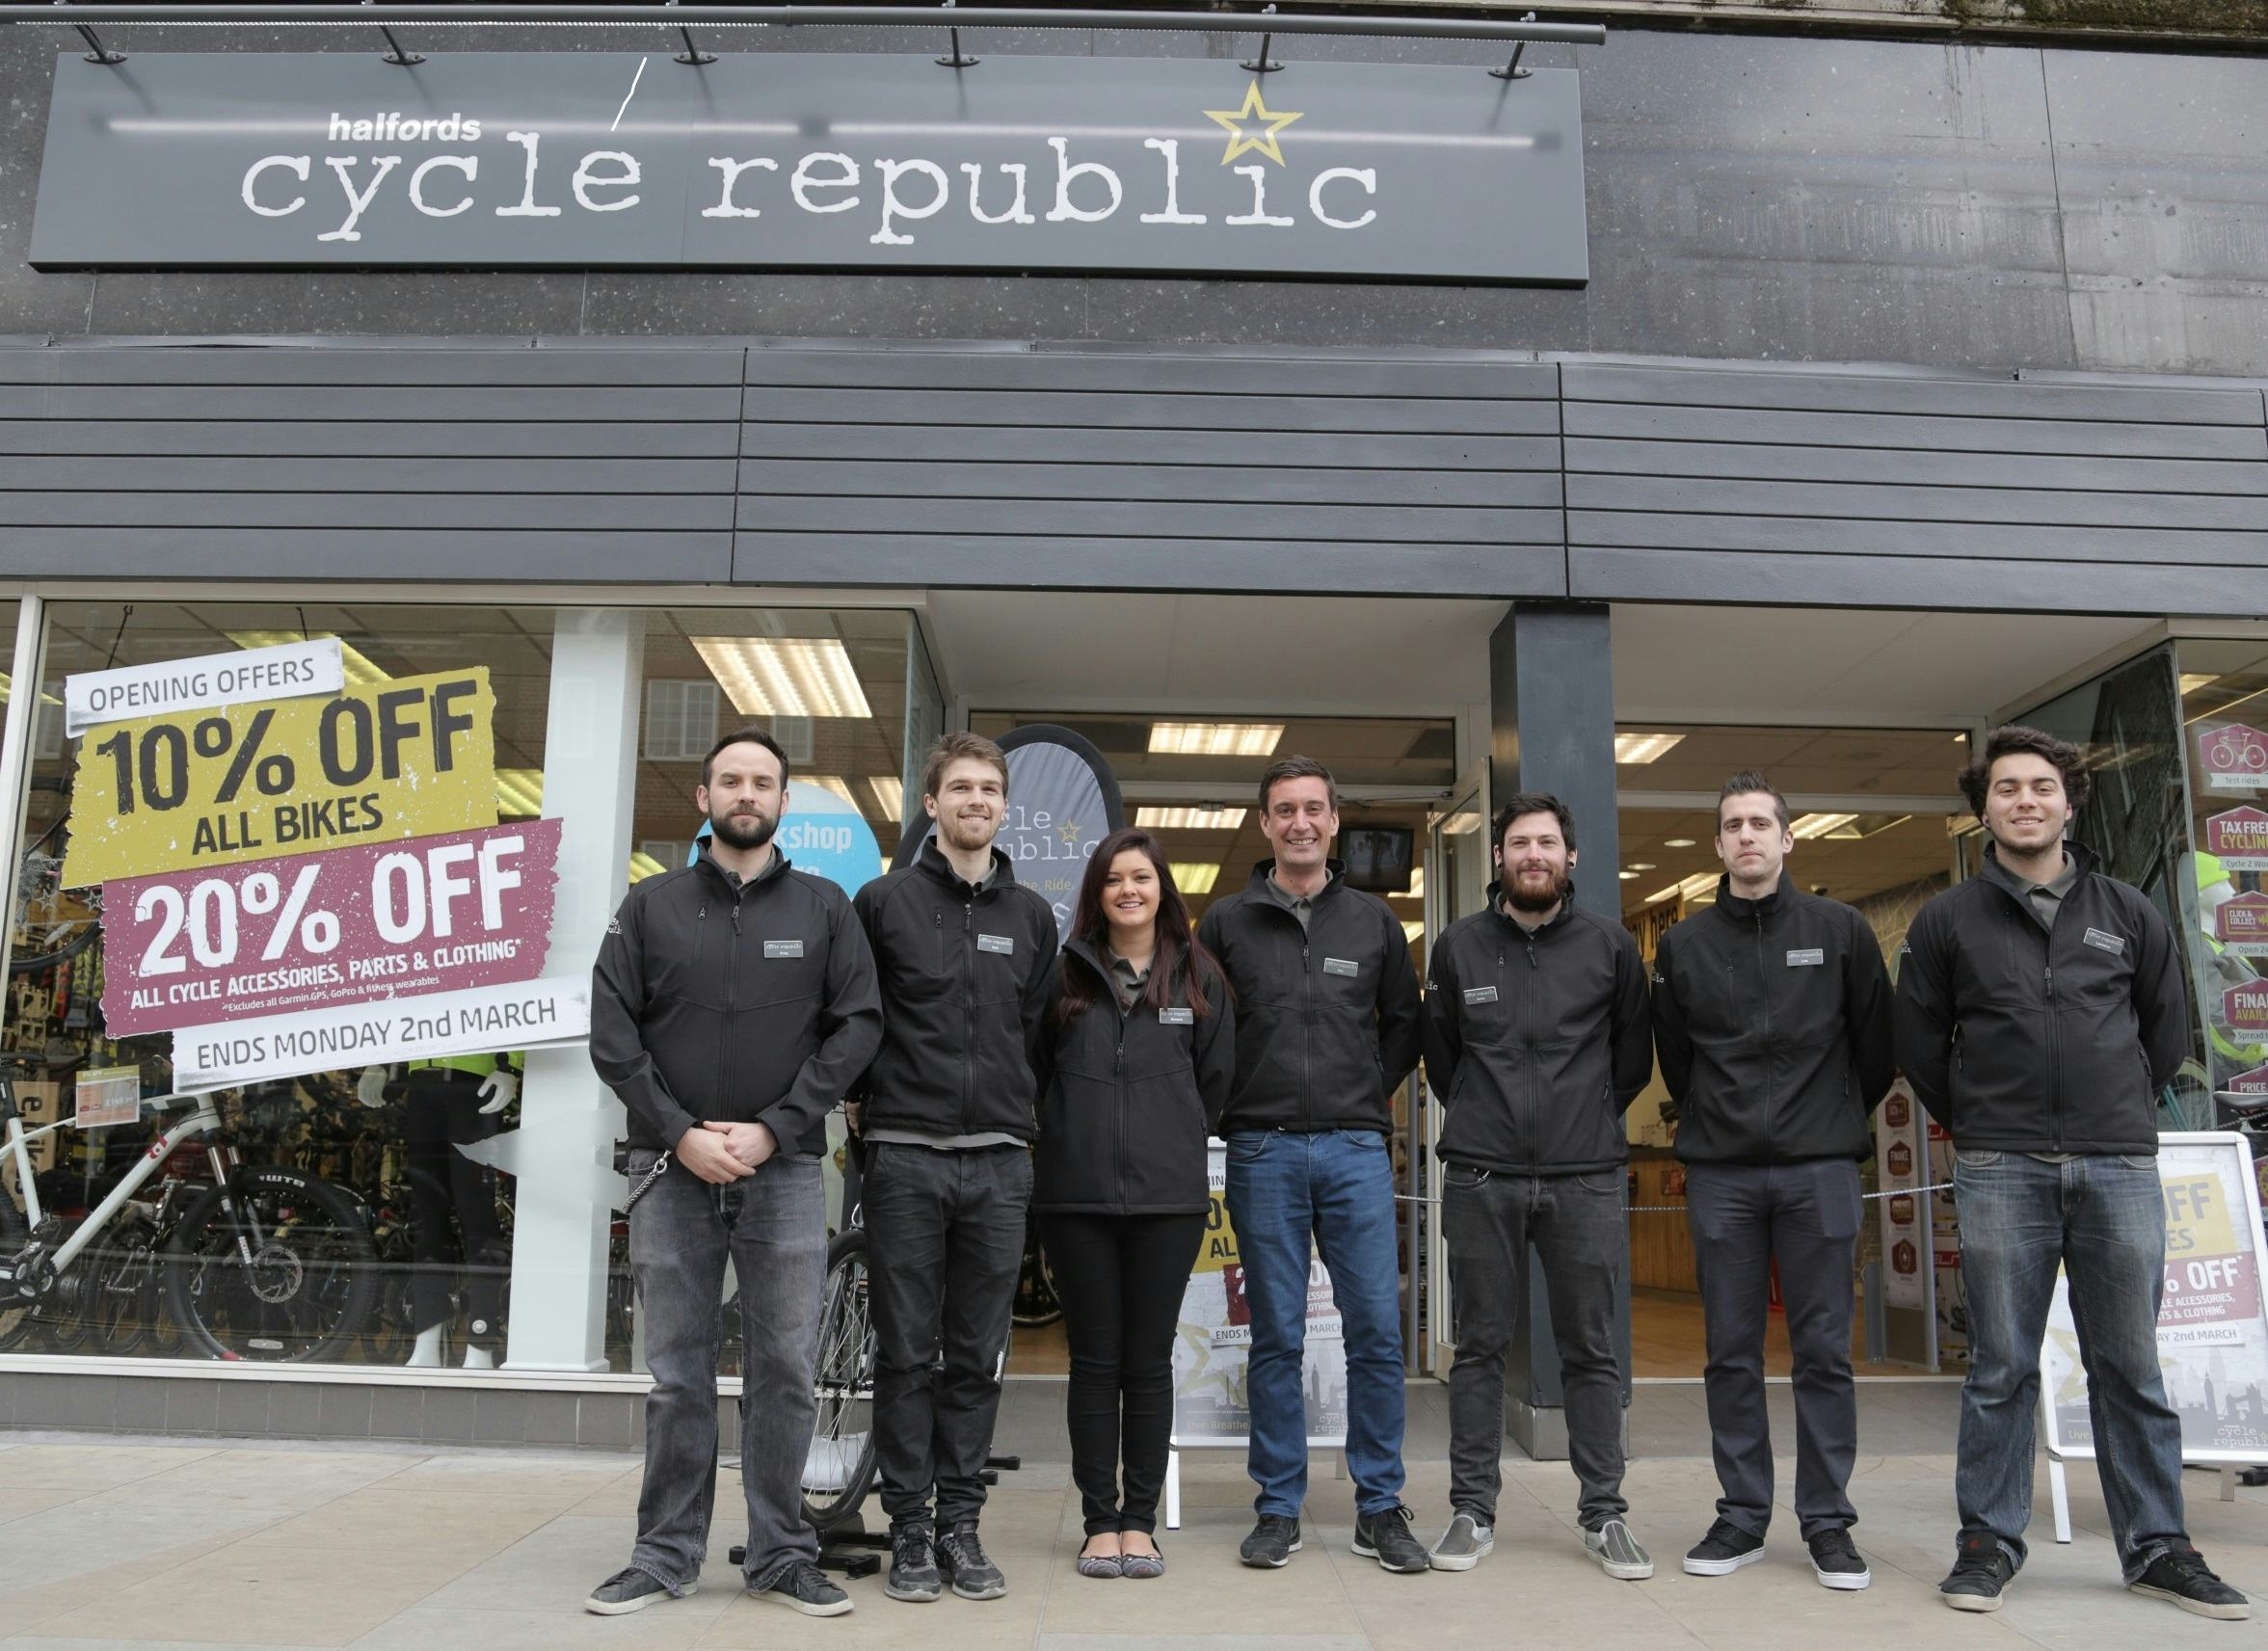 Cycle Republic recently took their cycle offering upmarket to fight competition, - Photo Cycle Republic